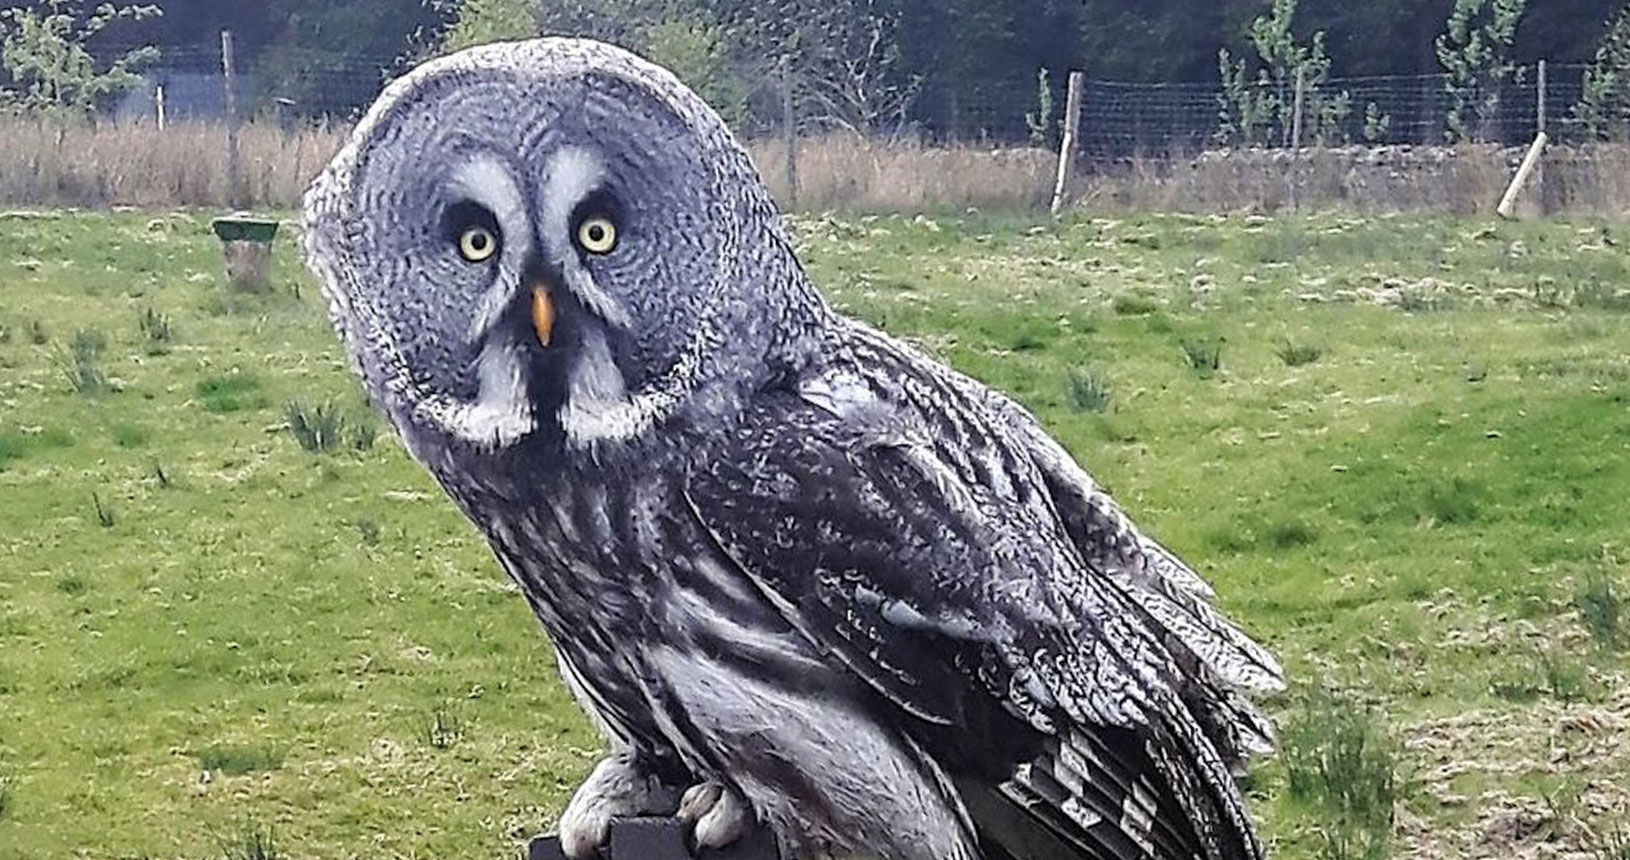 Kielder Water Birds of Prey Centre – One of the largest collections of birds  in the North of England